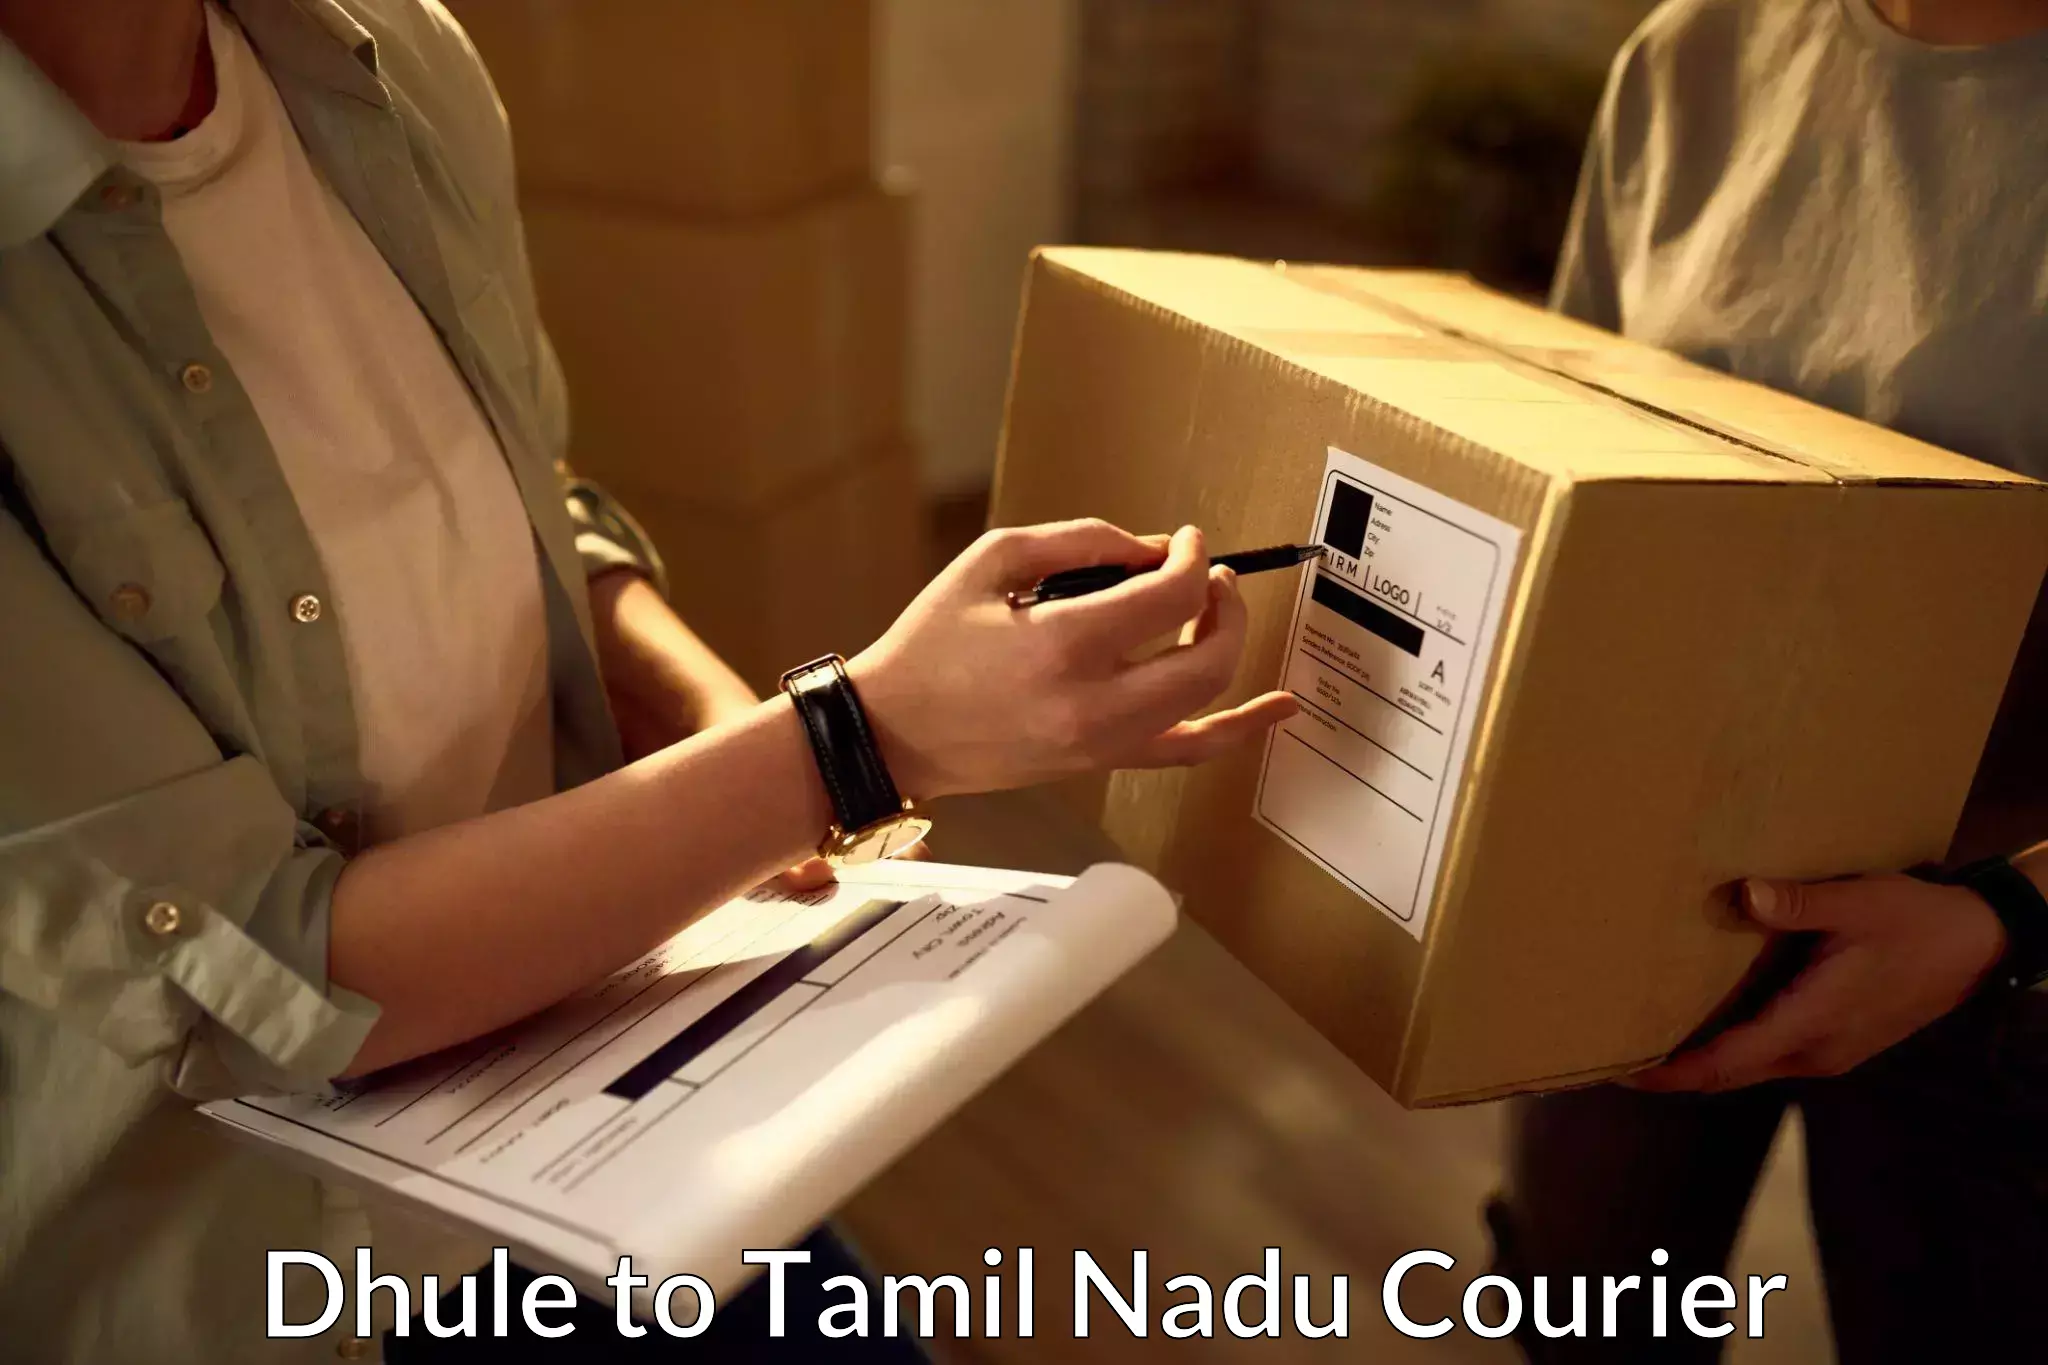 Sustainable courier practices Dhule to Tamil Nadu